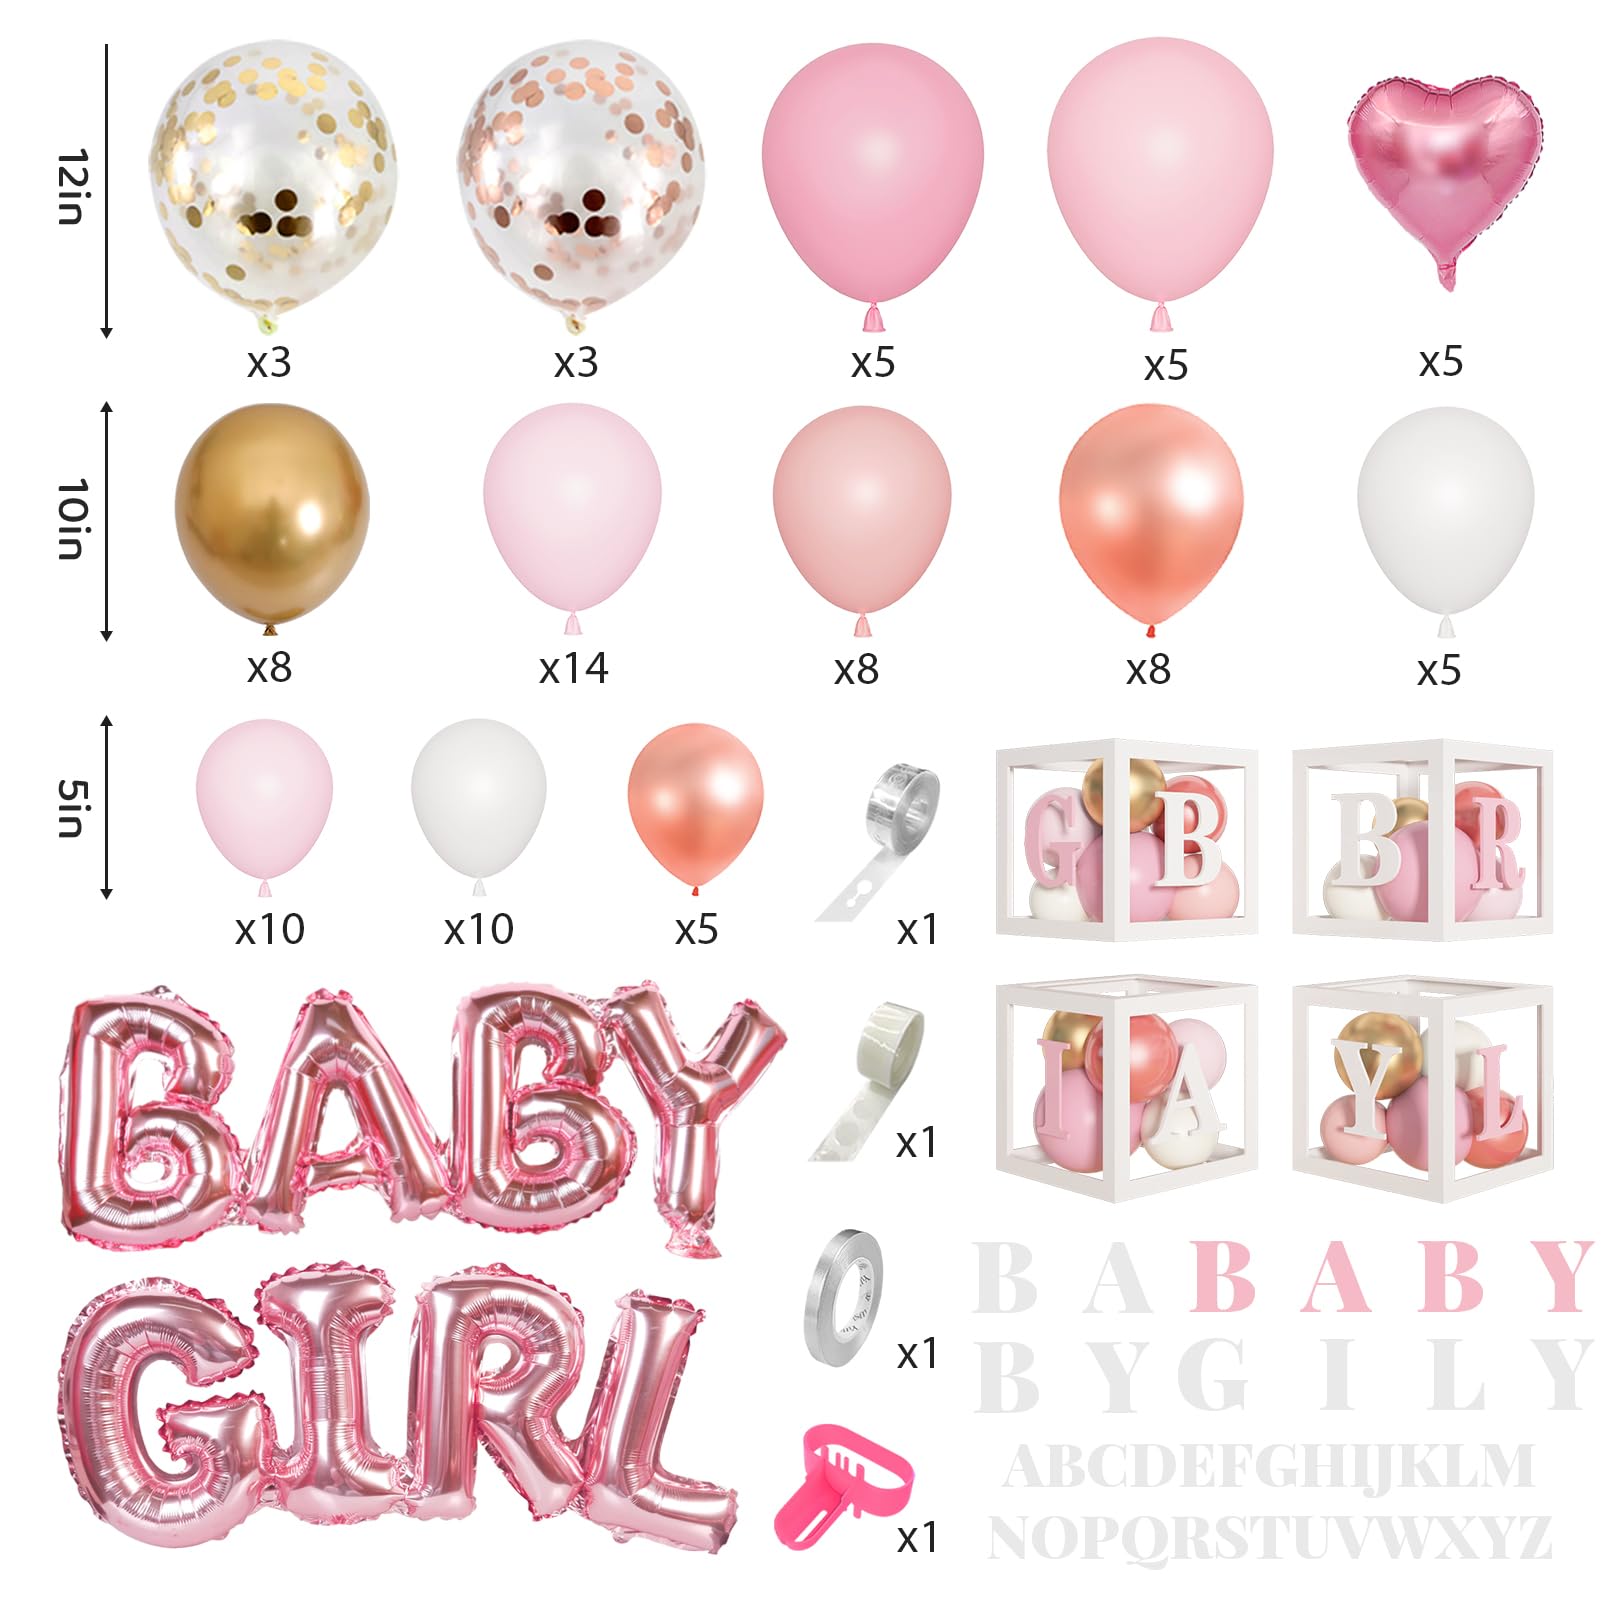 Amandir 137PCS Baby Shower Decoration for Girl Rose Gold Pink Balloon Garland Kit 4PCS Baby Balloon Block Boxes with Letters for Birthday Party Supplies Gender Reveal Decor